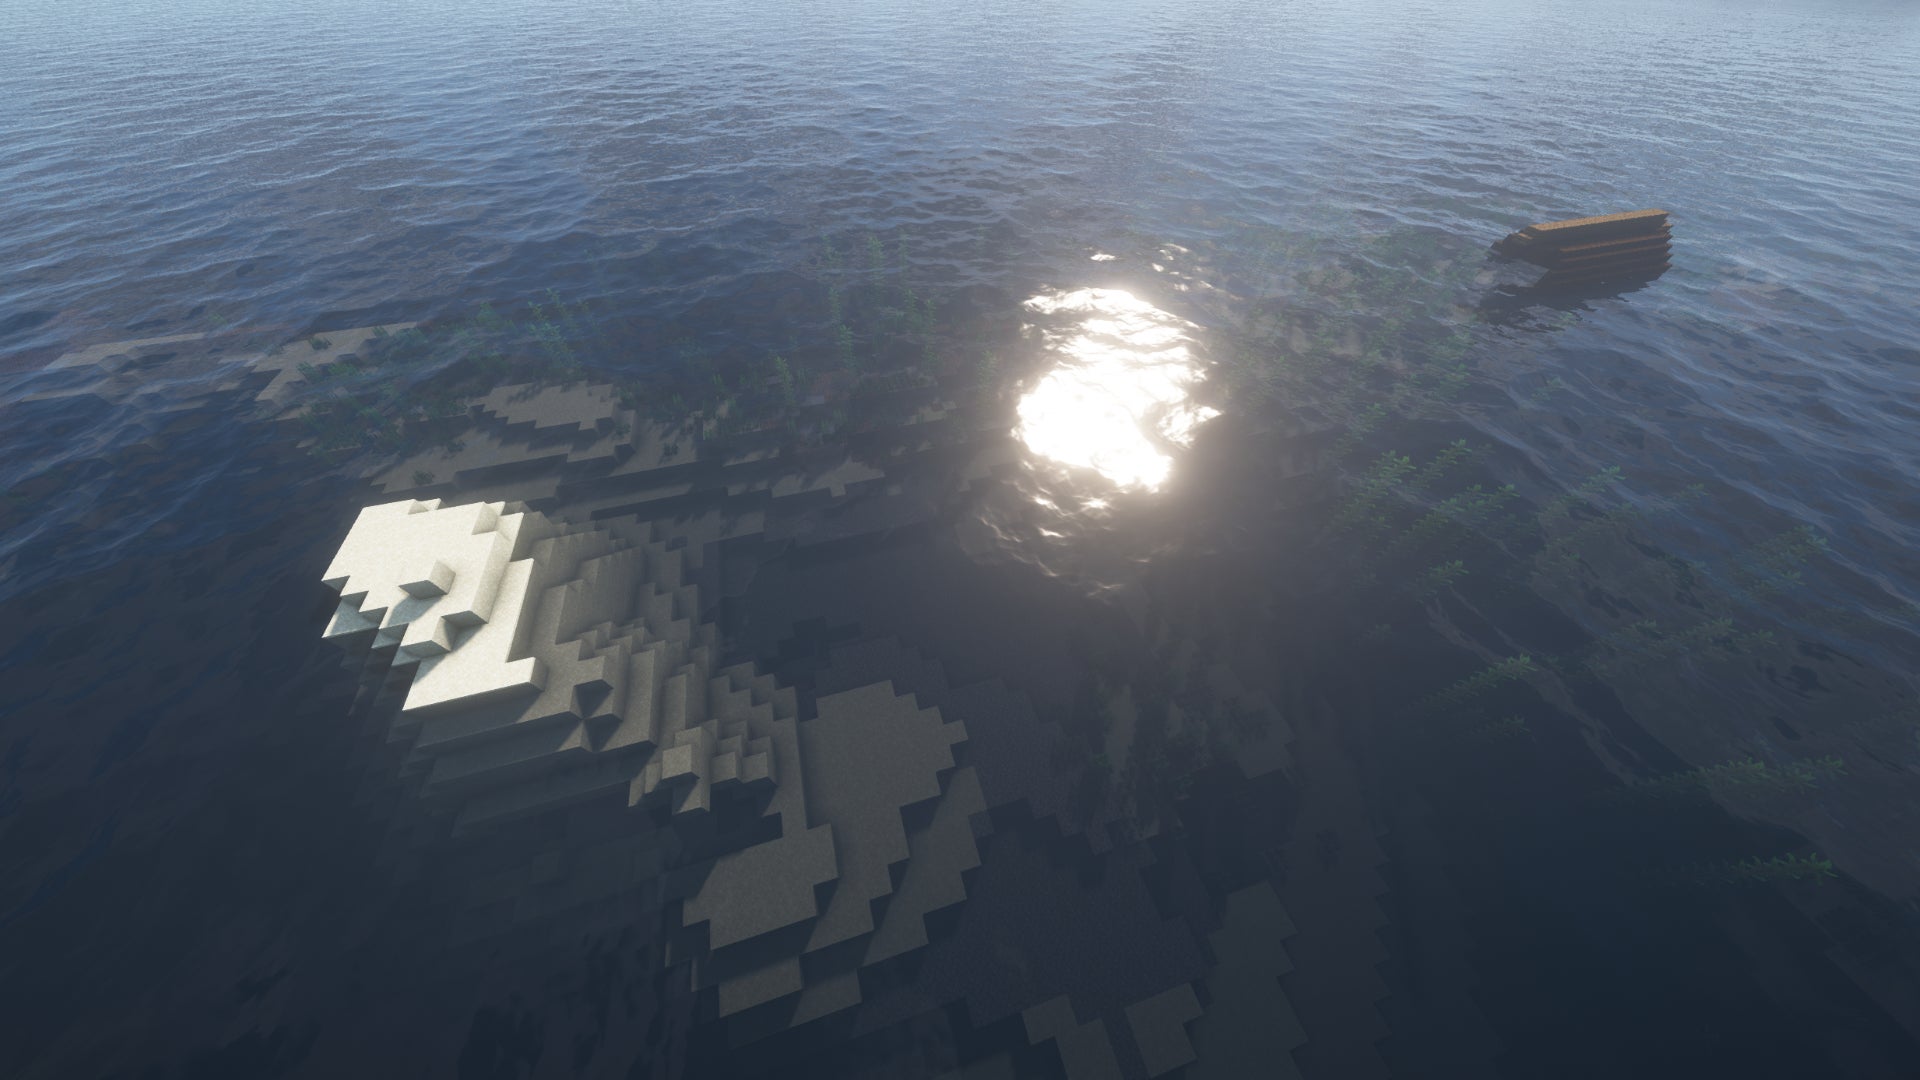 A Minecraft ocean, with a tiny sand island on the left and a shipwreck poking out of the sea on the right.